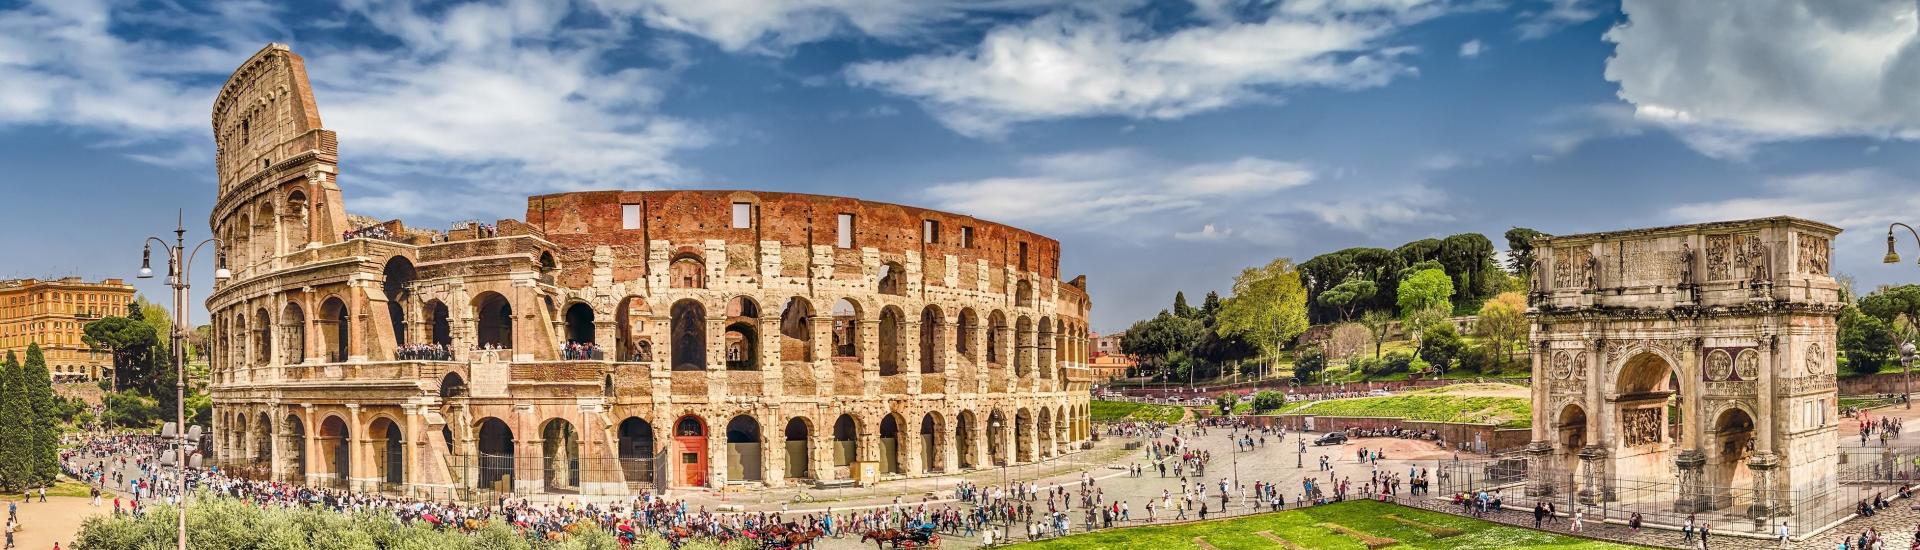 Panoramic colour stock photo of colosseum and arch in Rome with many people visiting monuments.